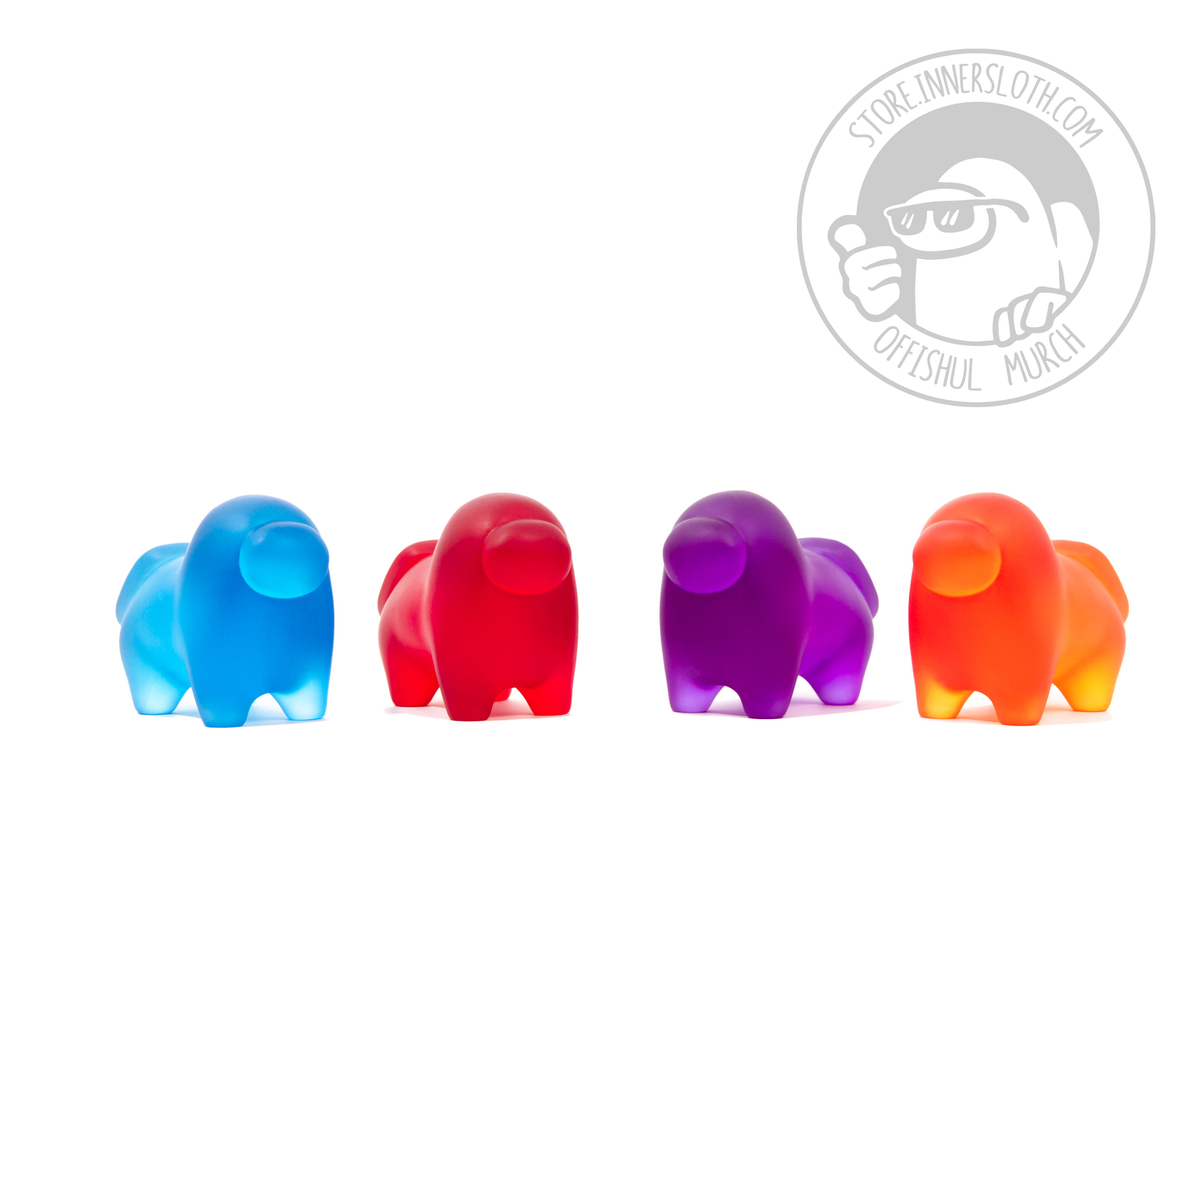 A photograph of all four translucent Crewgi Figurines on a white background. They are standing side-by-side in a 3/4 view. The order of Crewgis left to right is blue, red, purple, orange.